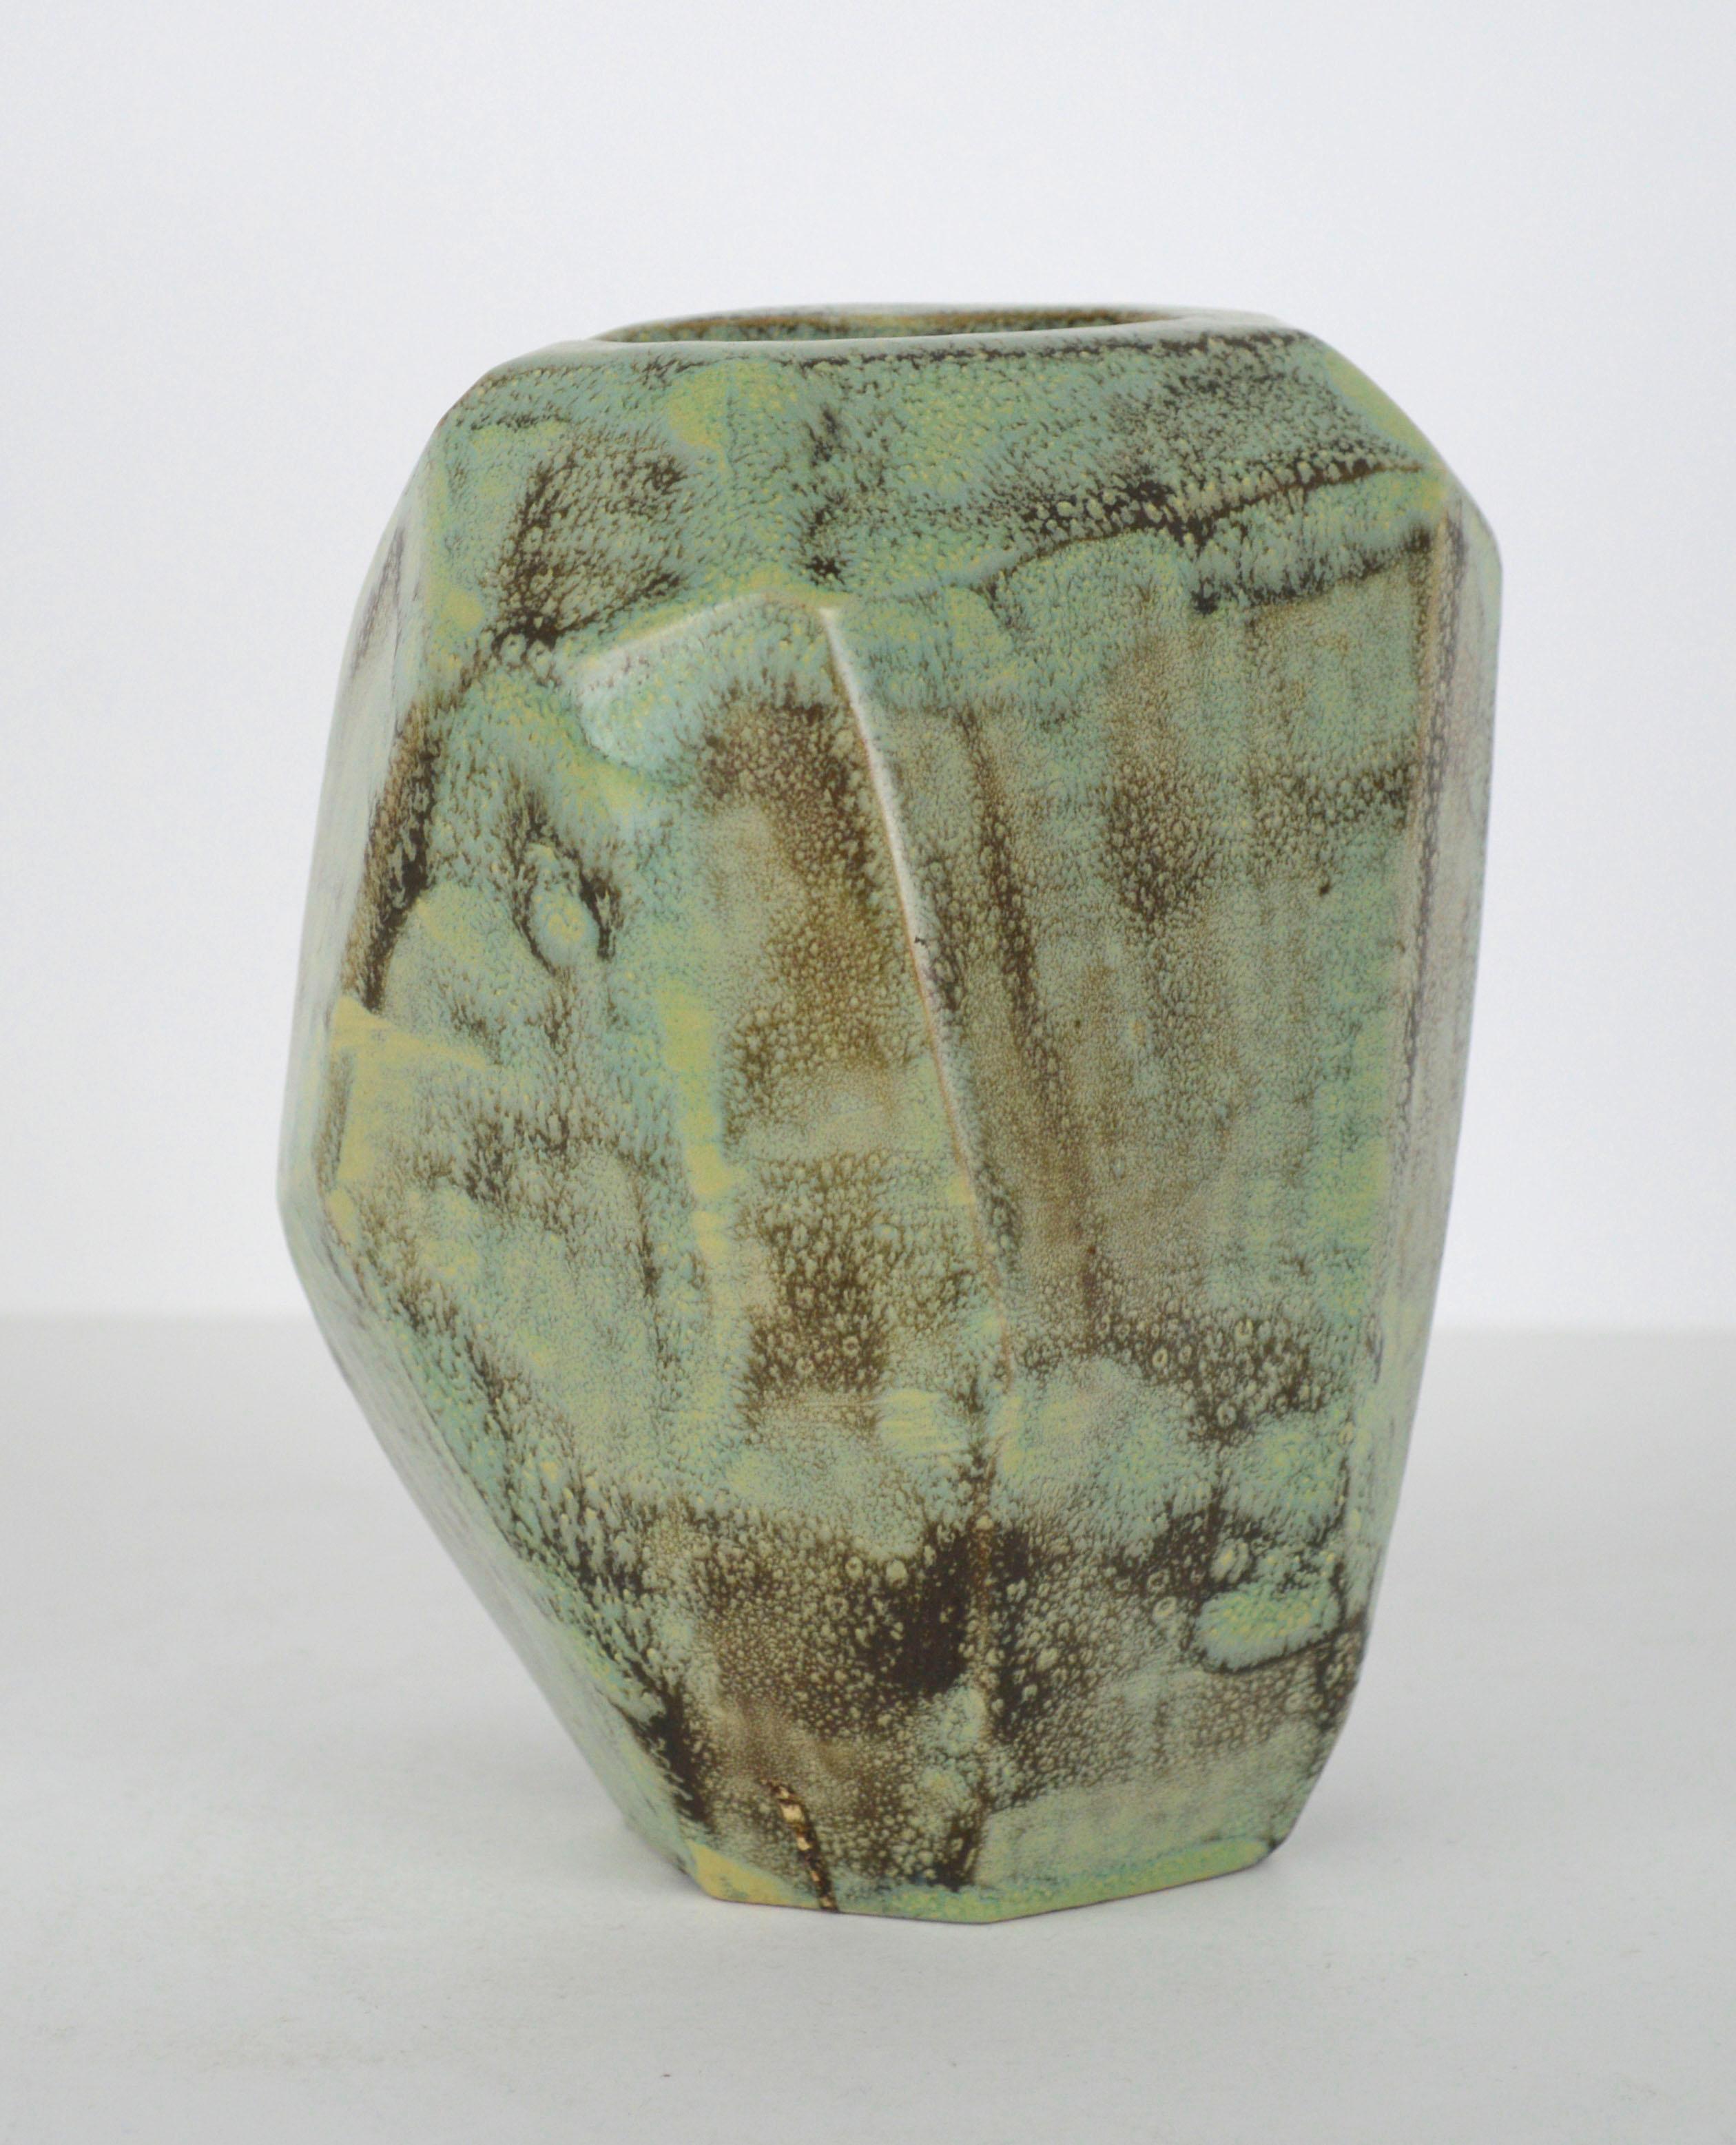 1950's Organic Modern Ceramic Turquoise Abstract Sculpture / Pottery Art Vase  For Sale 2